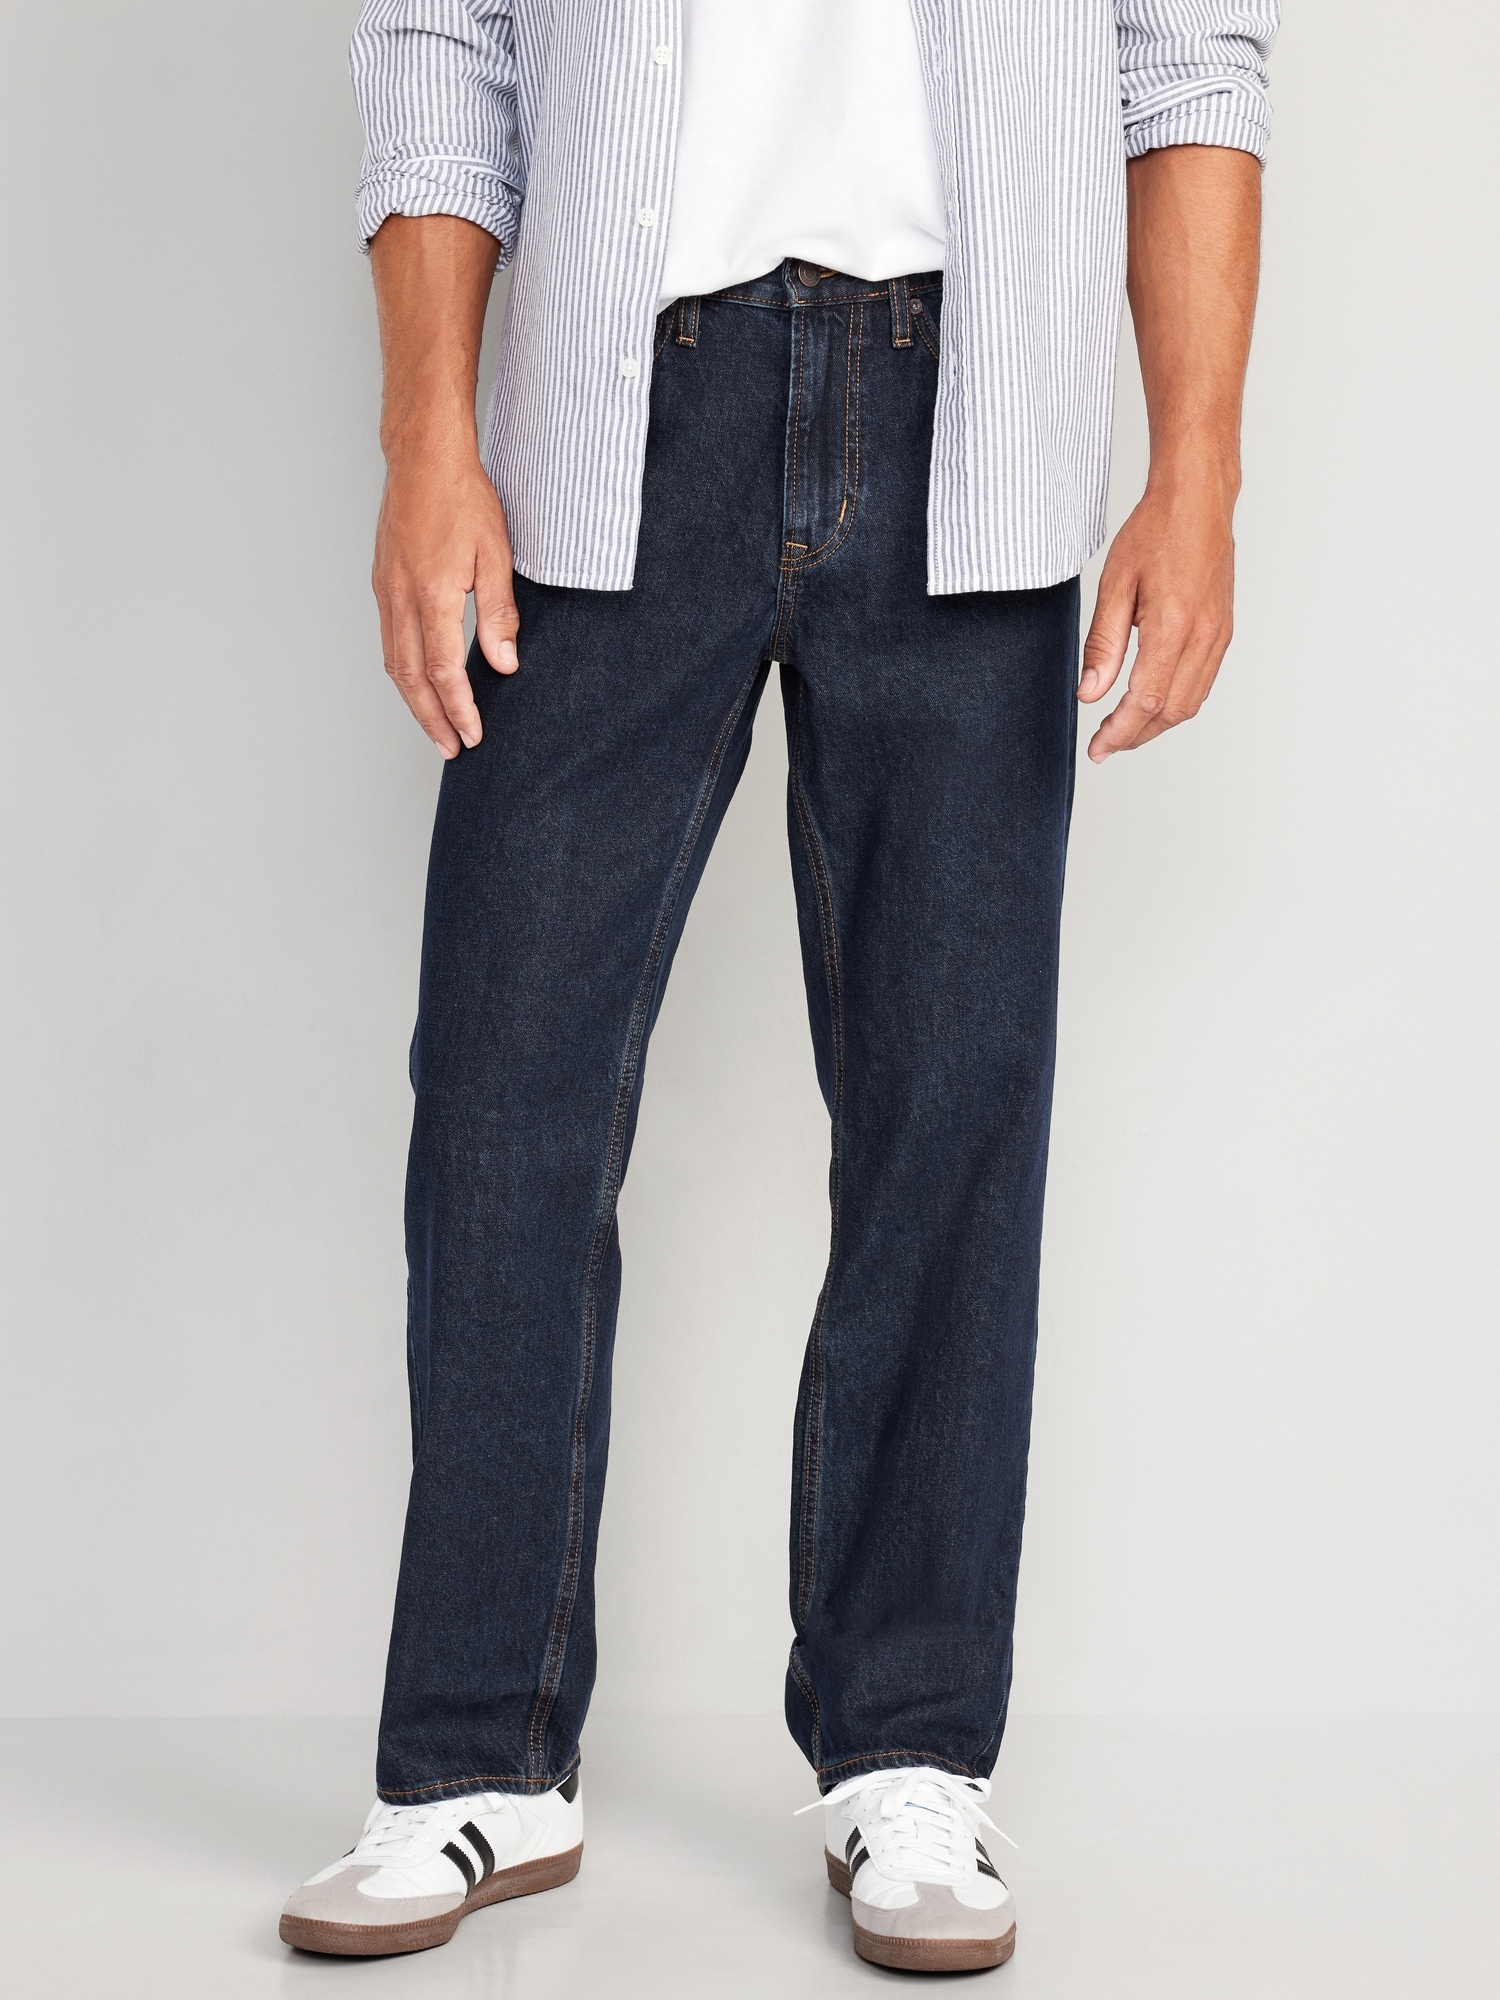 Everlane Jeans Review: Style Editor's Top Picks and Sizing Advice